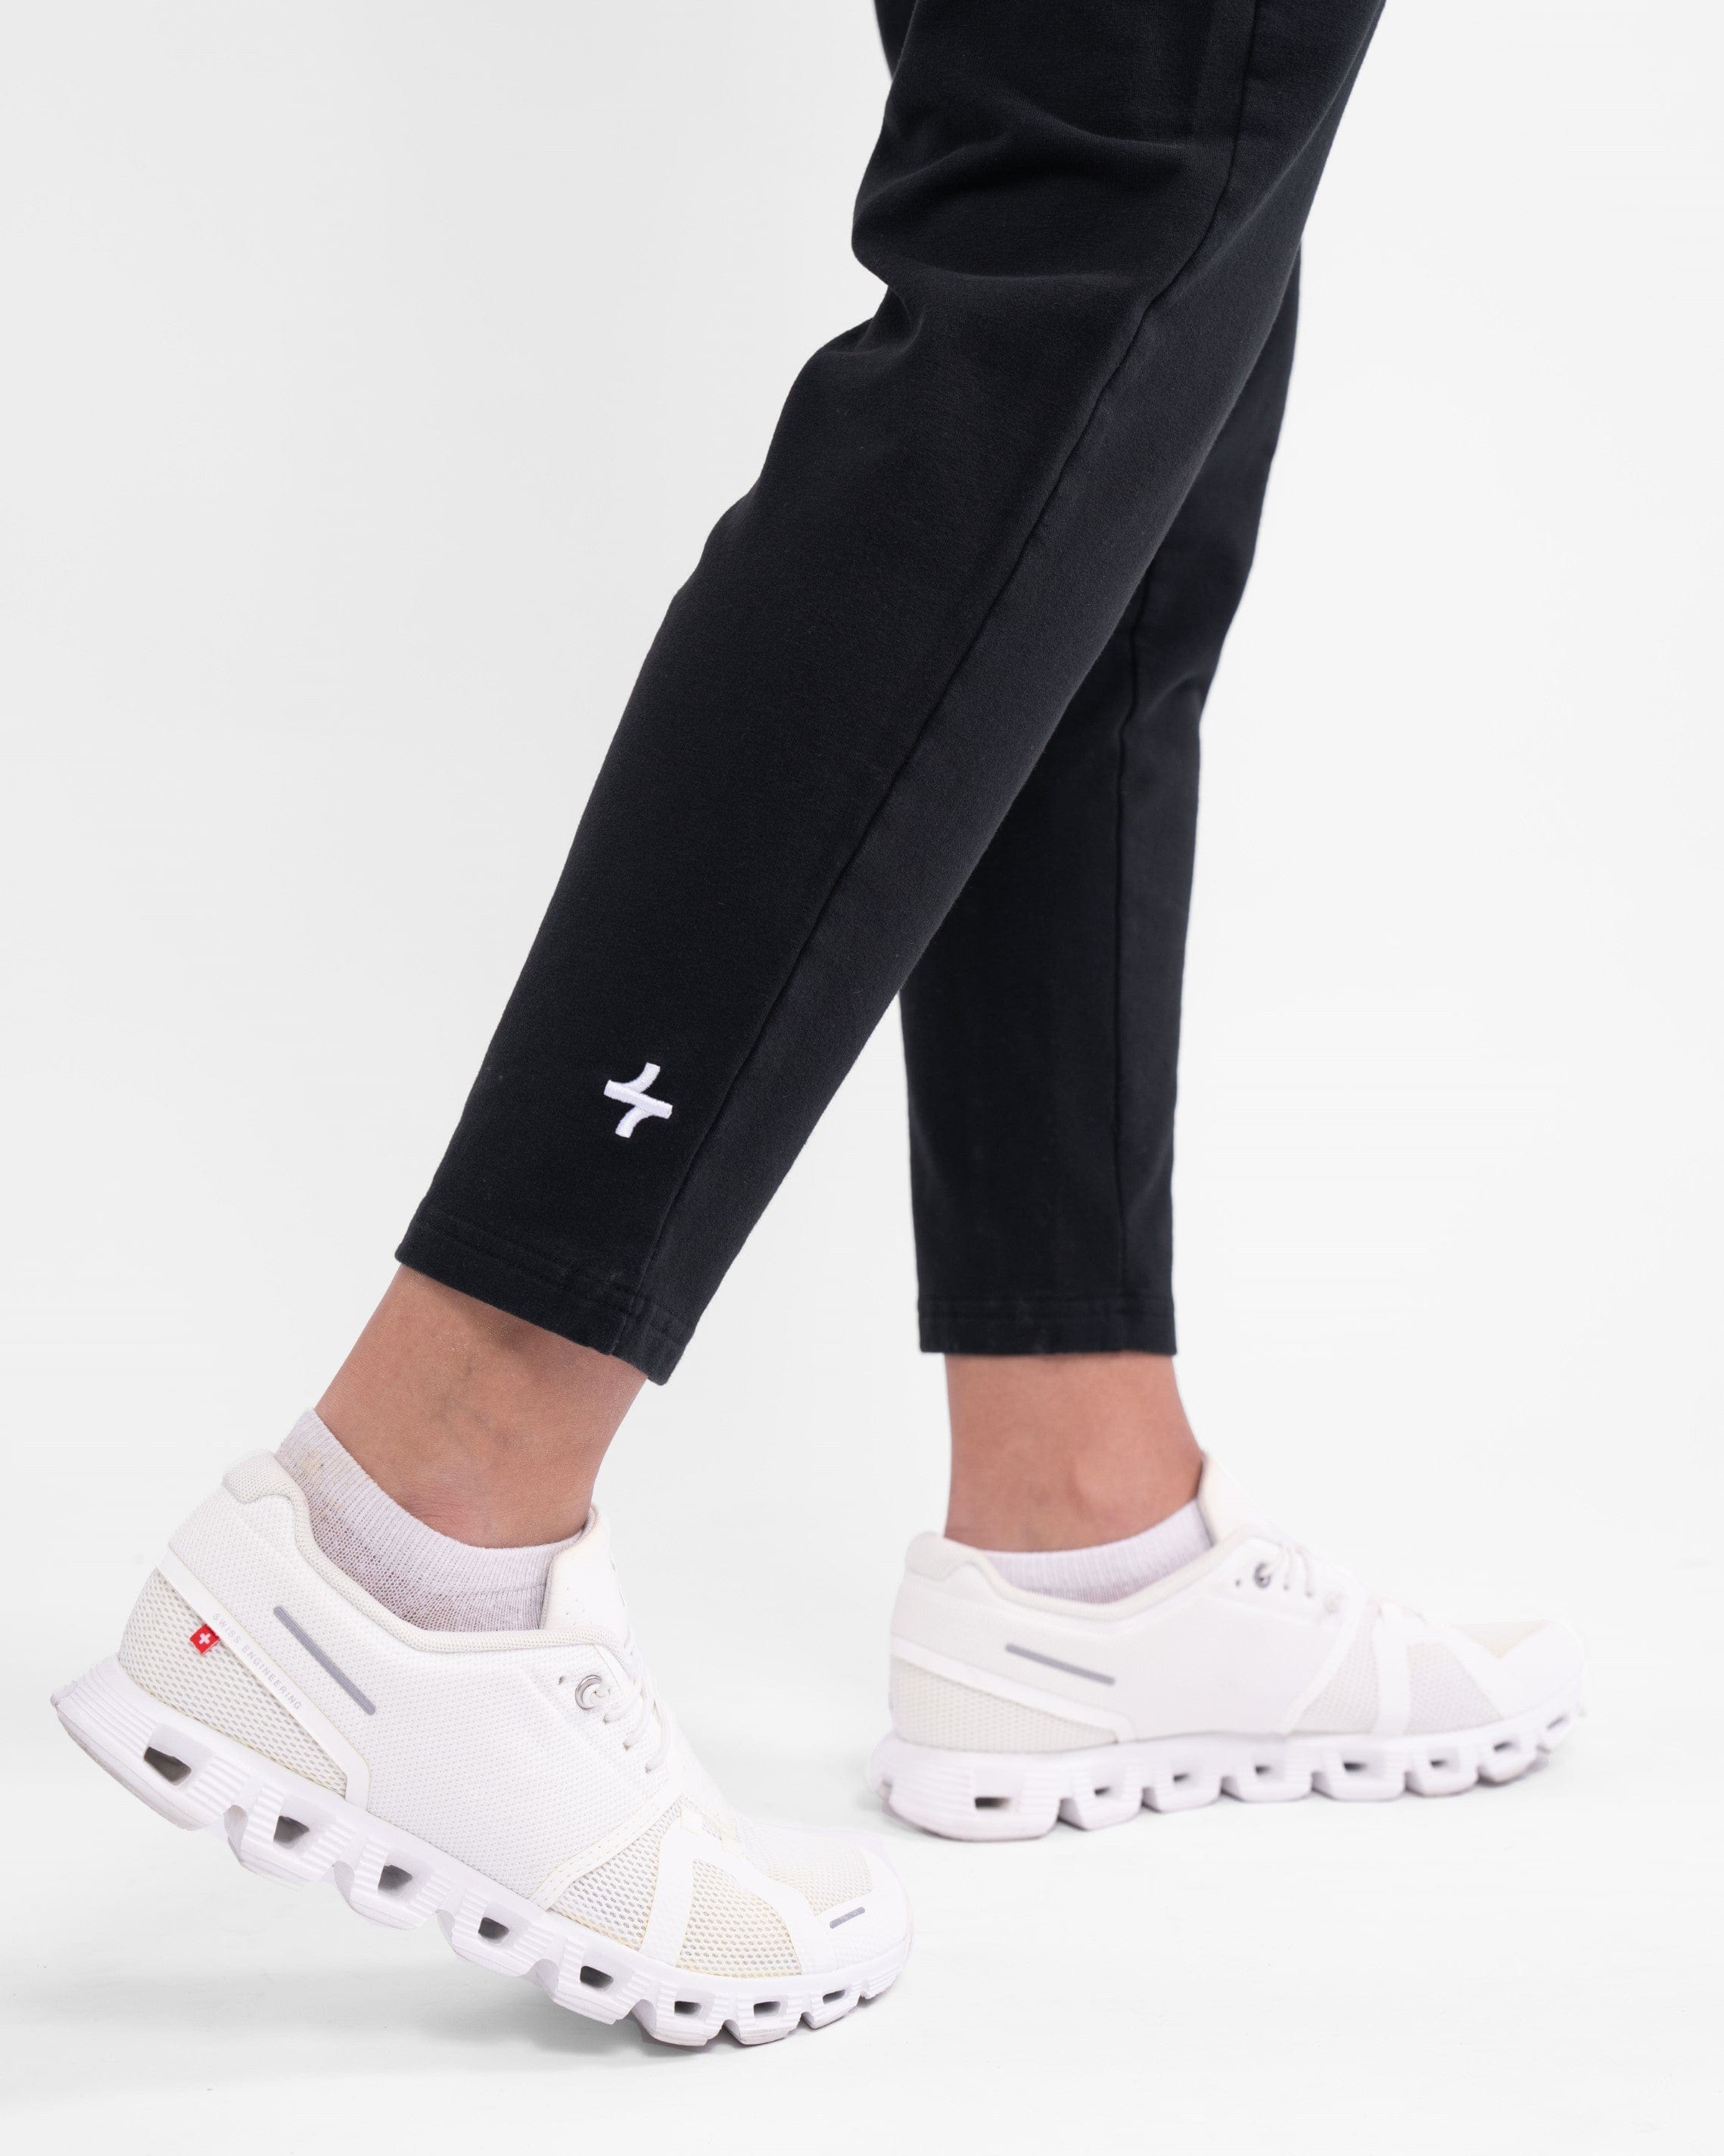 A close-up of a woman's lower legs clad in high-waisted, black CANTARA PANTS and white sneakers, highlighting modest sportswear of qynda.